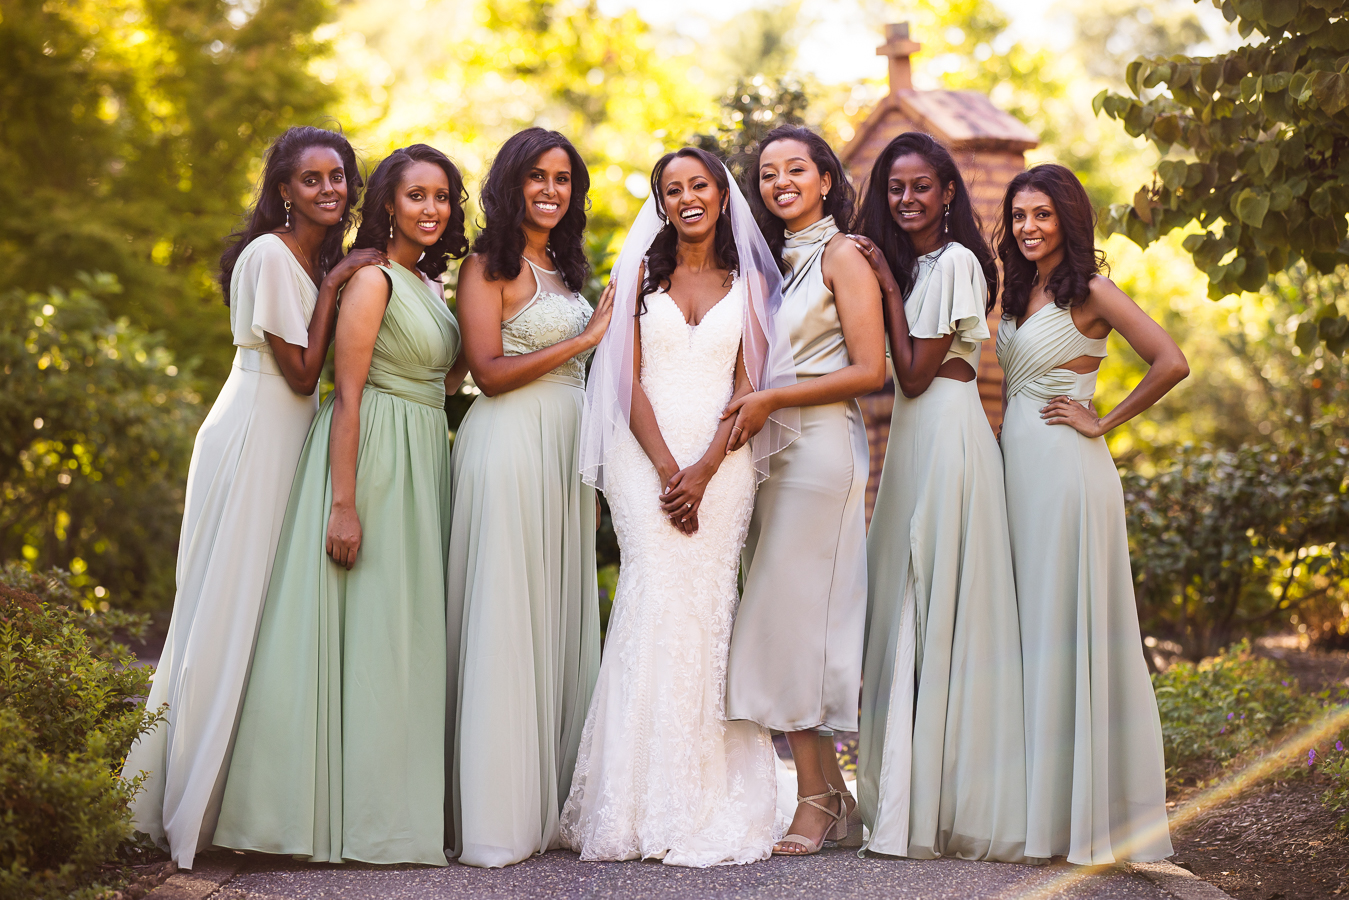 wedding photographer, Lisa Rhinehart, captures this traditional bridal party shot of the bride and her bridesmaids standing in a line smiling and laughing at the camera together outside of st francis hall 